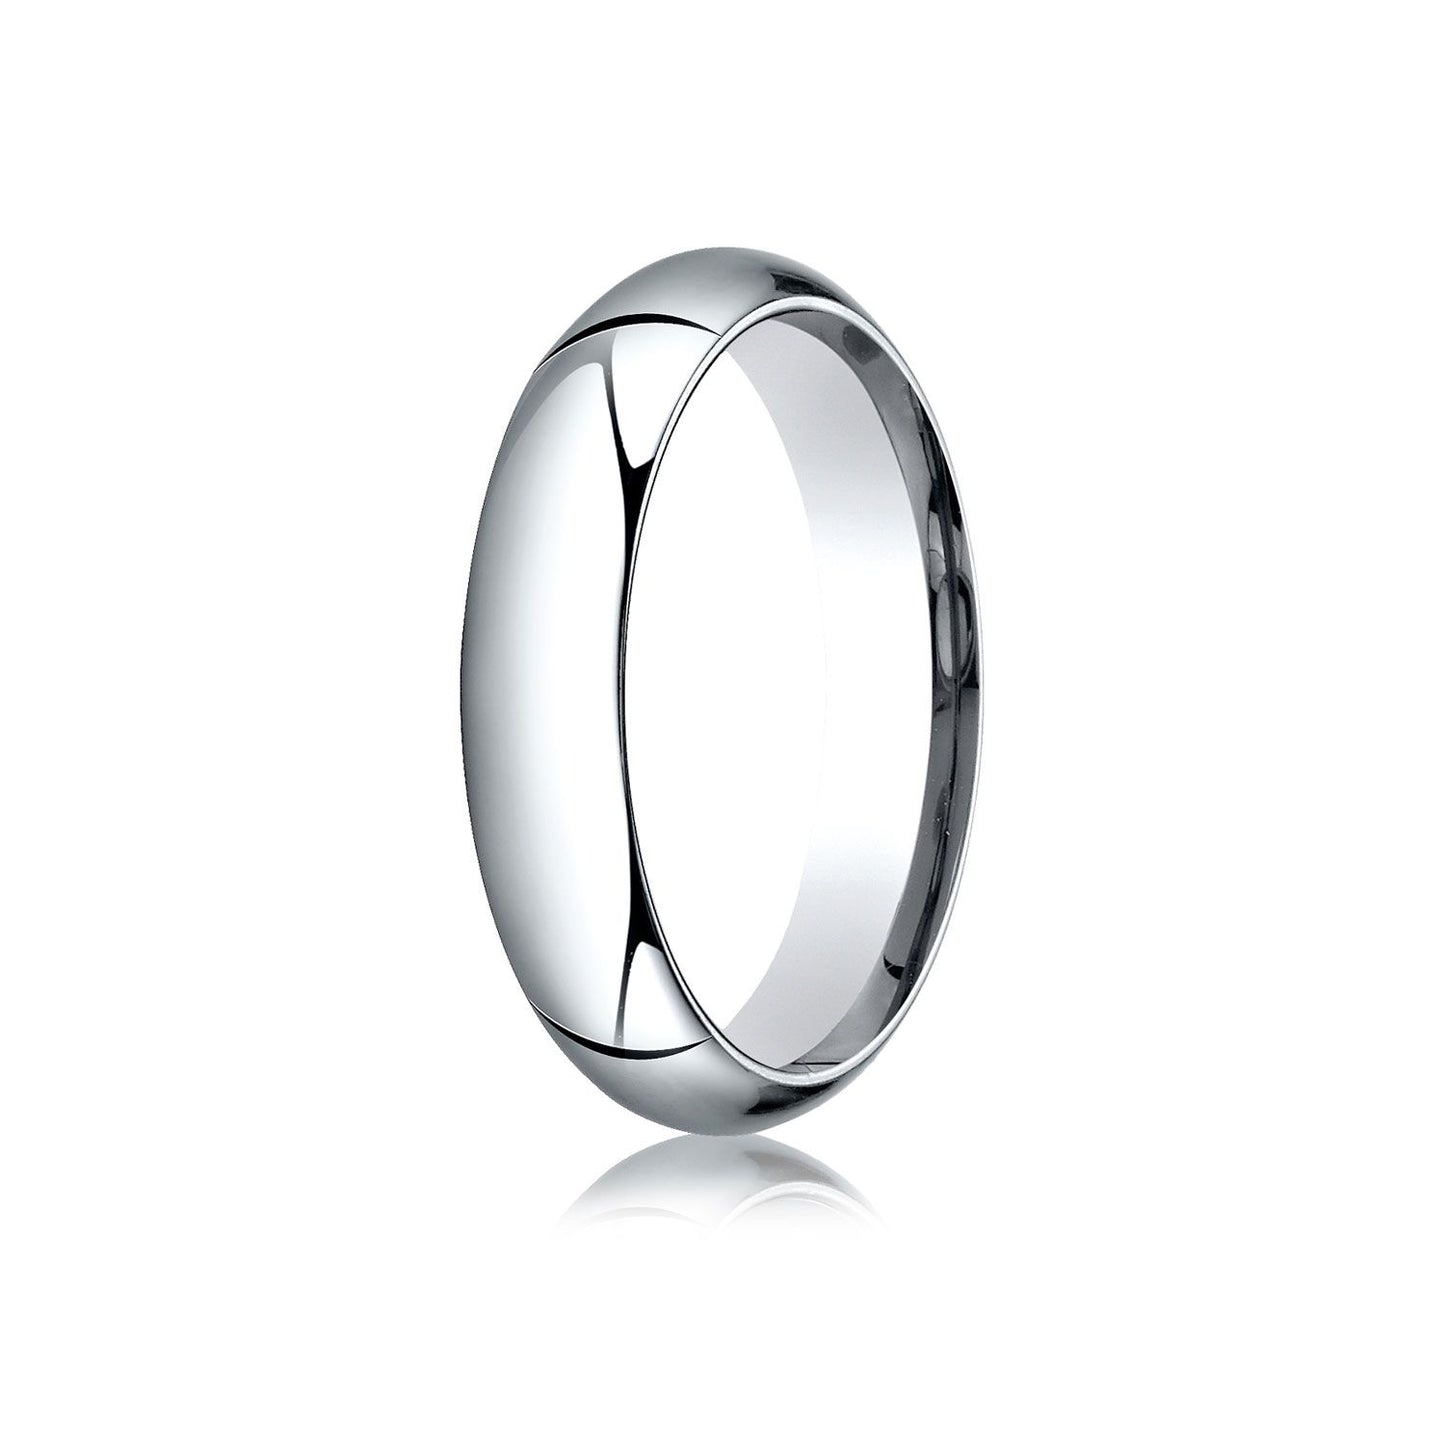 Platinum 5mm High Dome Comfort-fit Ring